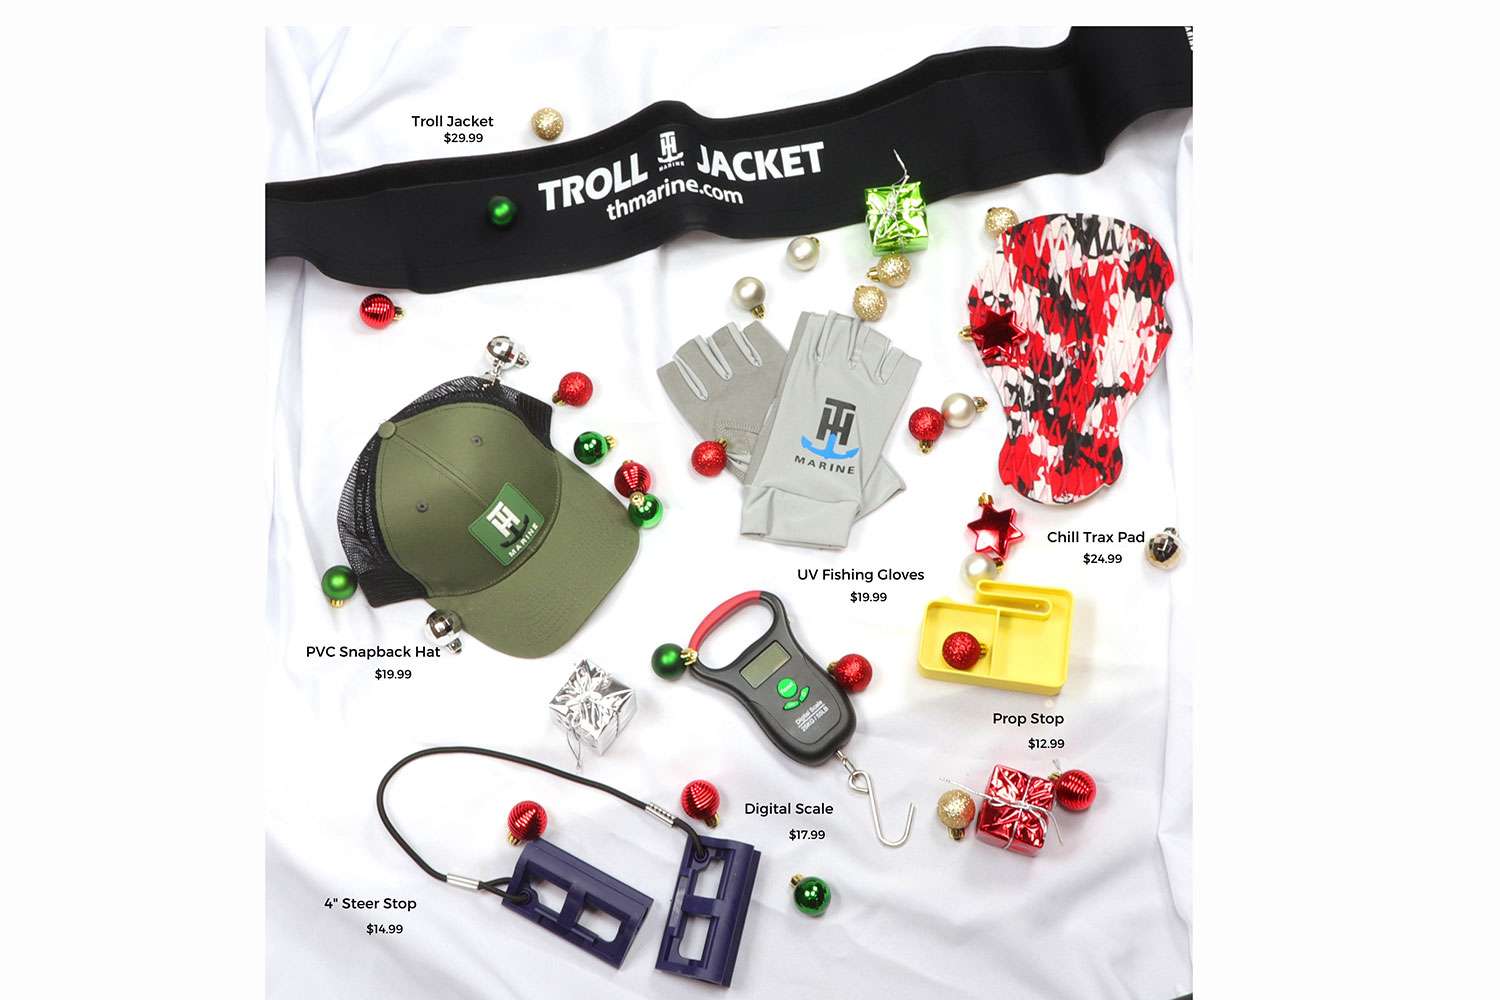 <p><b>T-H Marine Stocking Stuffers</b></p>
Useful. Affordable. Easy to buy. T-H Marine products are popular for good reason, especially for anglers making lists and savvy shoppers looking to buy fishing and boating products for someone they love. This includes the products that are tried and true and four great items that are brand new, too. (1) For a non-slip surface that is also cool-to-the-touch for barefoot anglers, check out Chill Trax Traction Pads. (2) For a top-performing scale at an excellent price, sure to help with biggun' bragging rights, get the Digital Fishing Scale. (3-4) And if you really want to pull out all the stops this gift-giving season, get a Steer Stop to protect even the most expensive outboard motors and a Prop Stop to protect both hands and equipment during a propeller change. With all these and more, everyone can choose from stocking stuffers that help make boating safer, easier, and stylish, too. T-H Marine has your gift list covered From Transom to Trolling Motor!<br>
<p><b></b></p>
<a href=